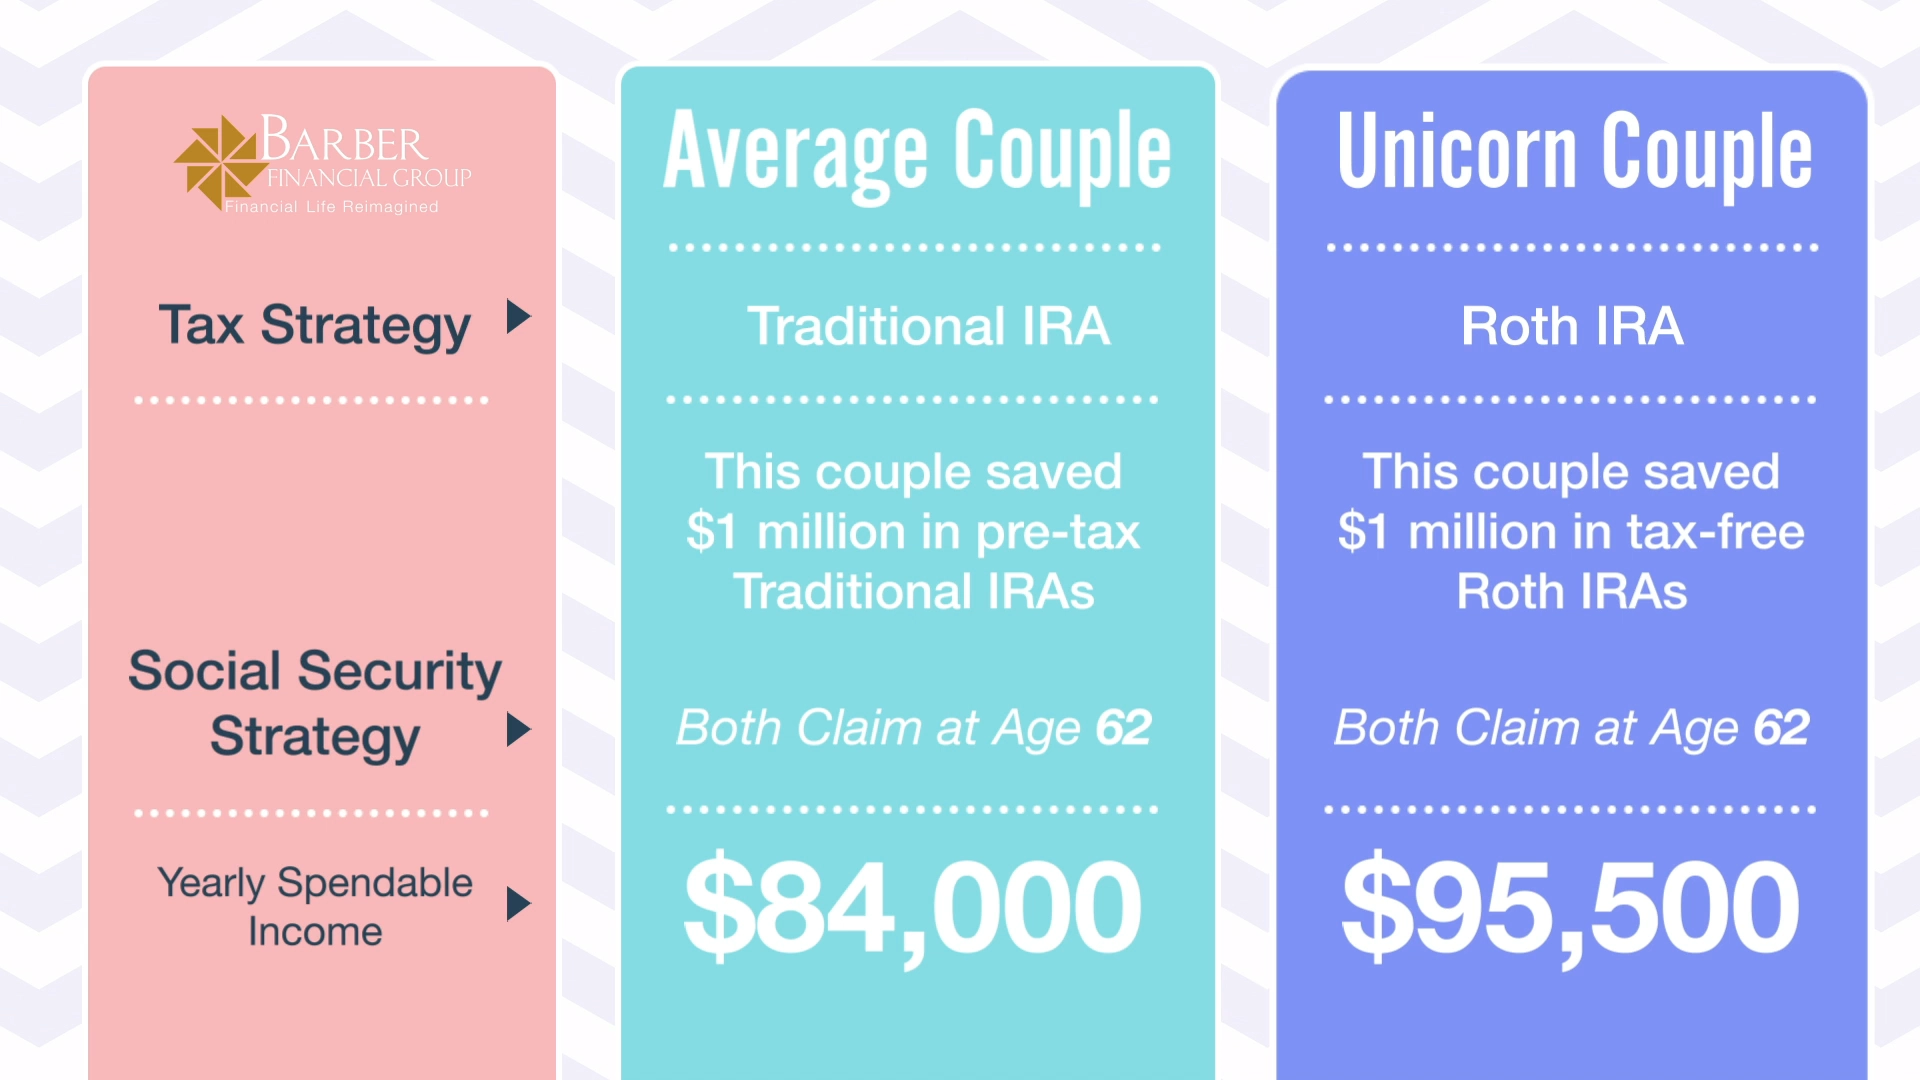 Retiring with $1 Million - Unicorn Couples Yearly Ideal Income SS at 62